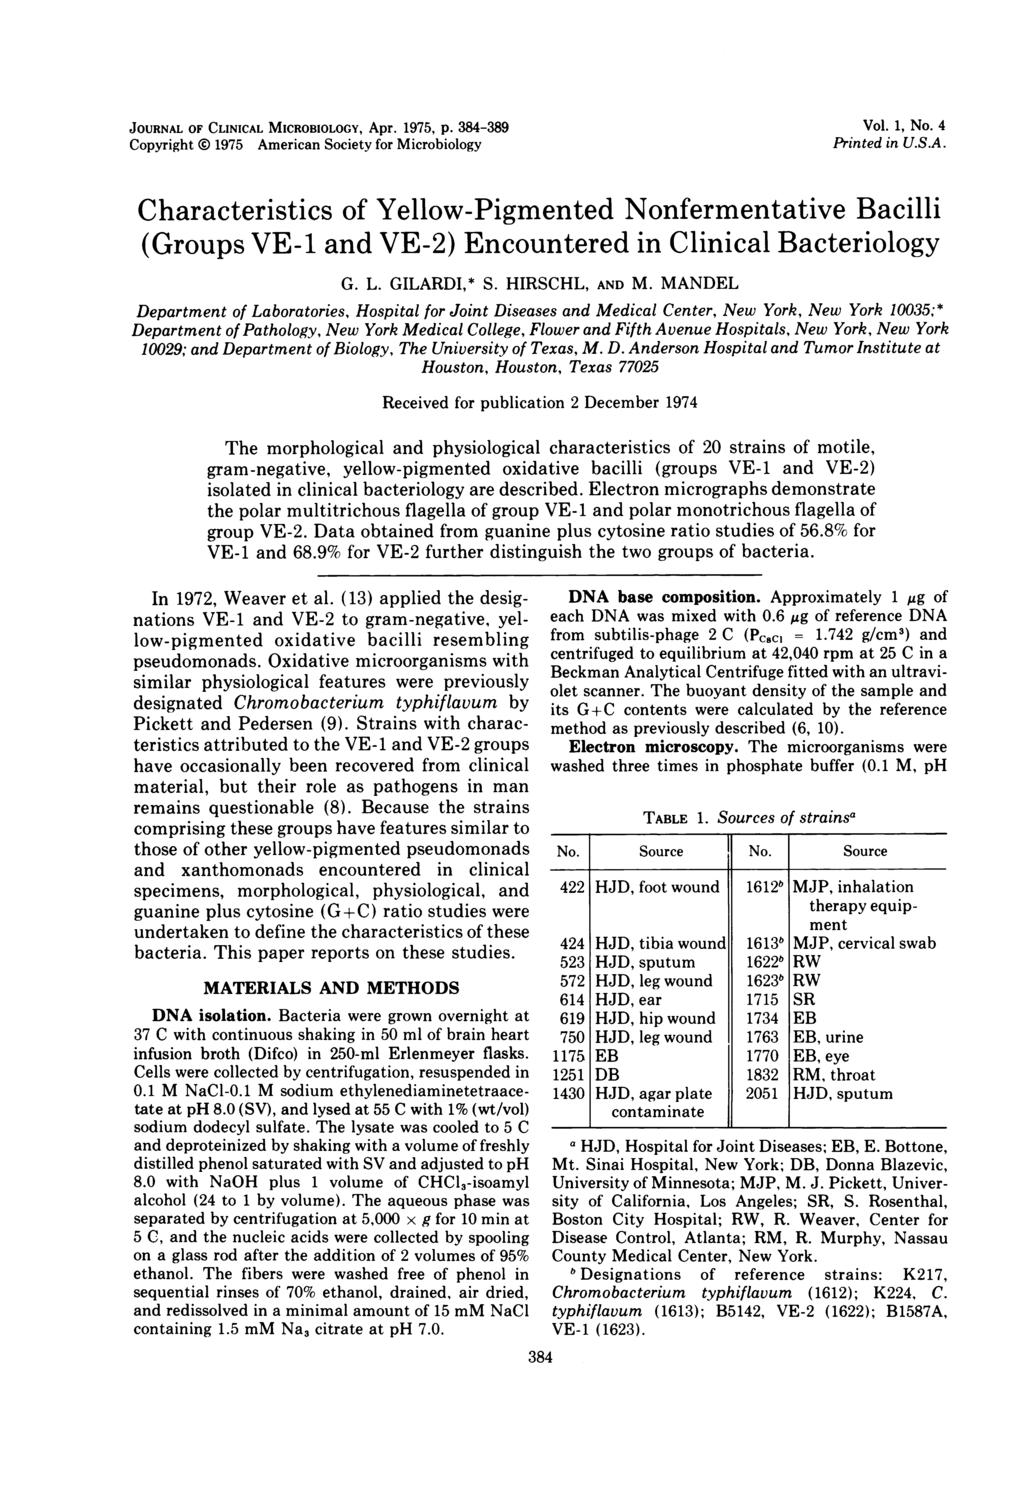 JOURNAL OF CLINICAL MICROBIOLOGY, Apr. 1975, p. 384-389 Copyright ( 1975 American Society for Microbiology Vol. 1, No. 4 Printed in U.S.A. Characteristics of Yellow-Pigmented Nonfermentative Bacilli (Groups VE-1 and VE-2) Encountered in Clinical Bacteriology G.